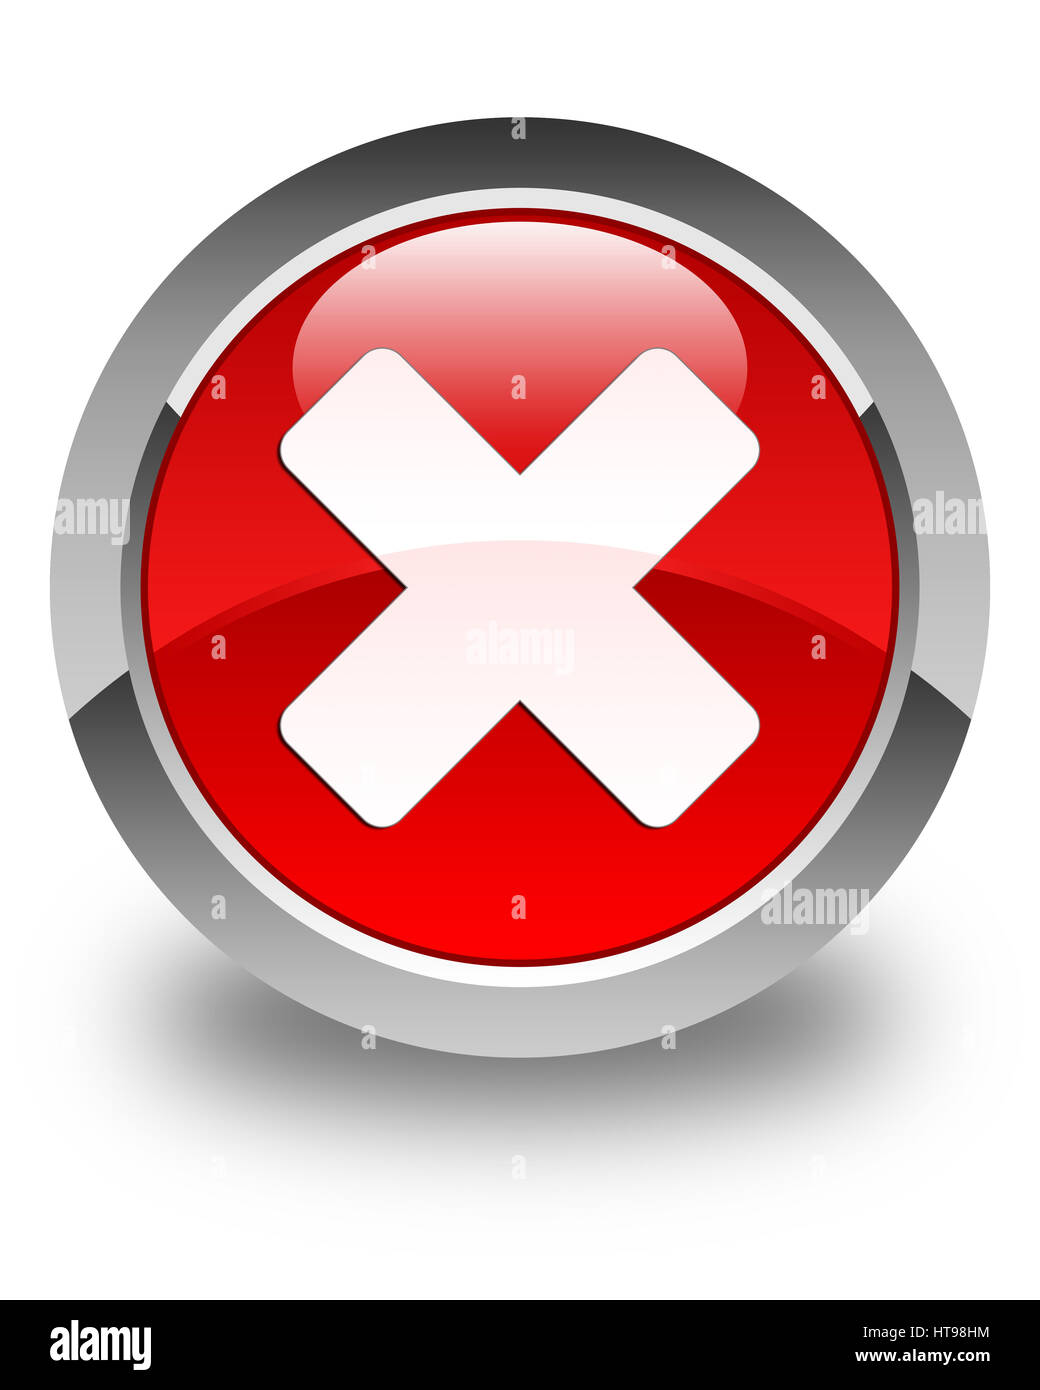 Cancel icon isolated on glossy red round button abstract illustration Stock Photo